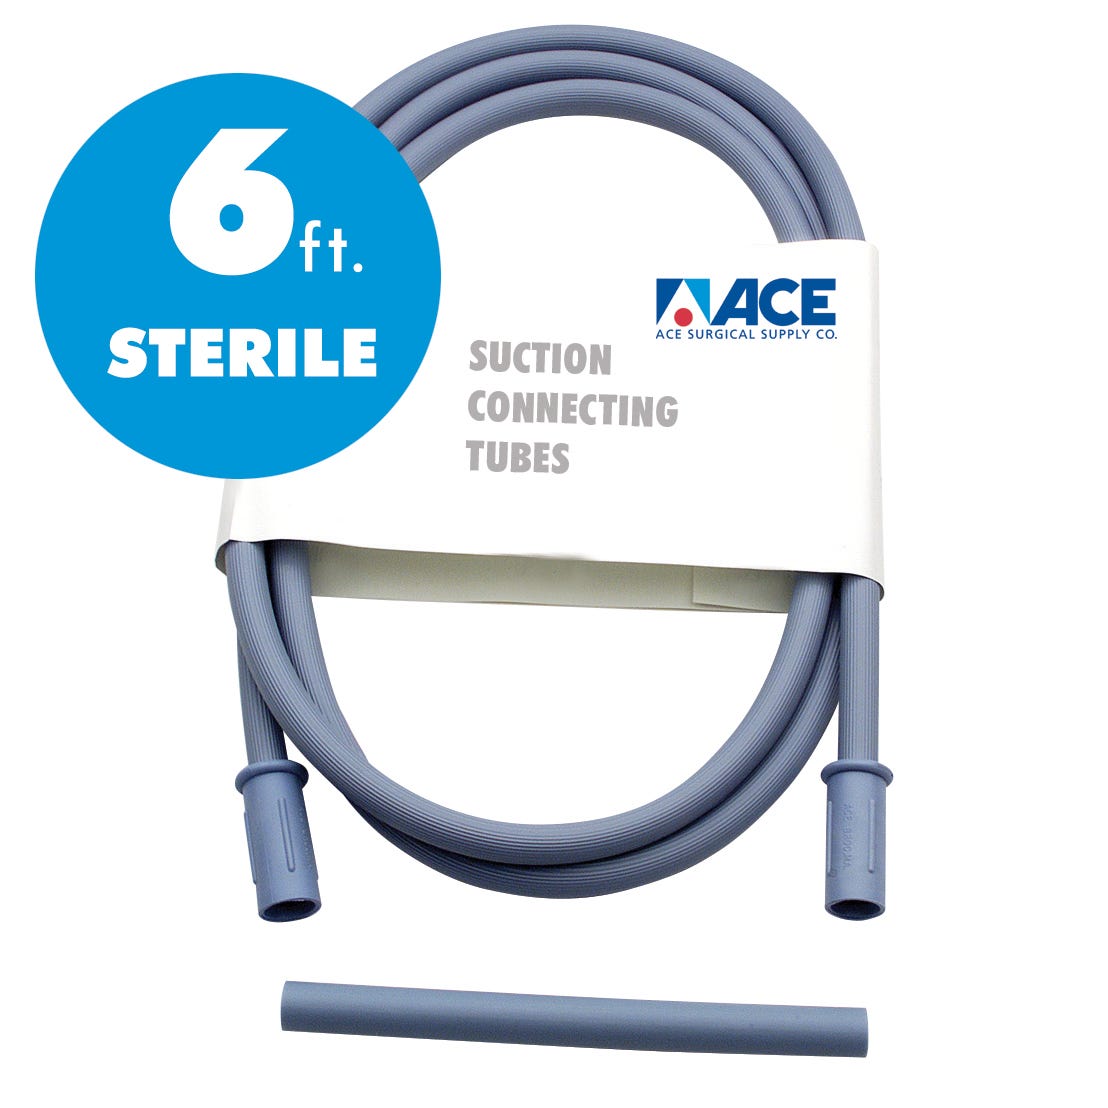 ACE Suction Connection Tubing Sterile - Opaque Blue with Adapter, 6' long - 20/Case